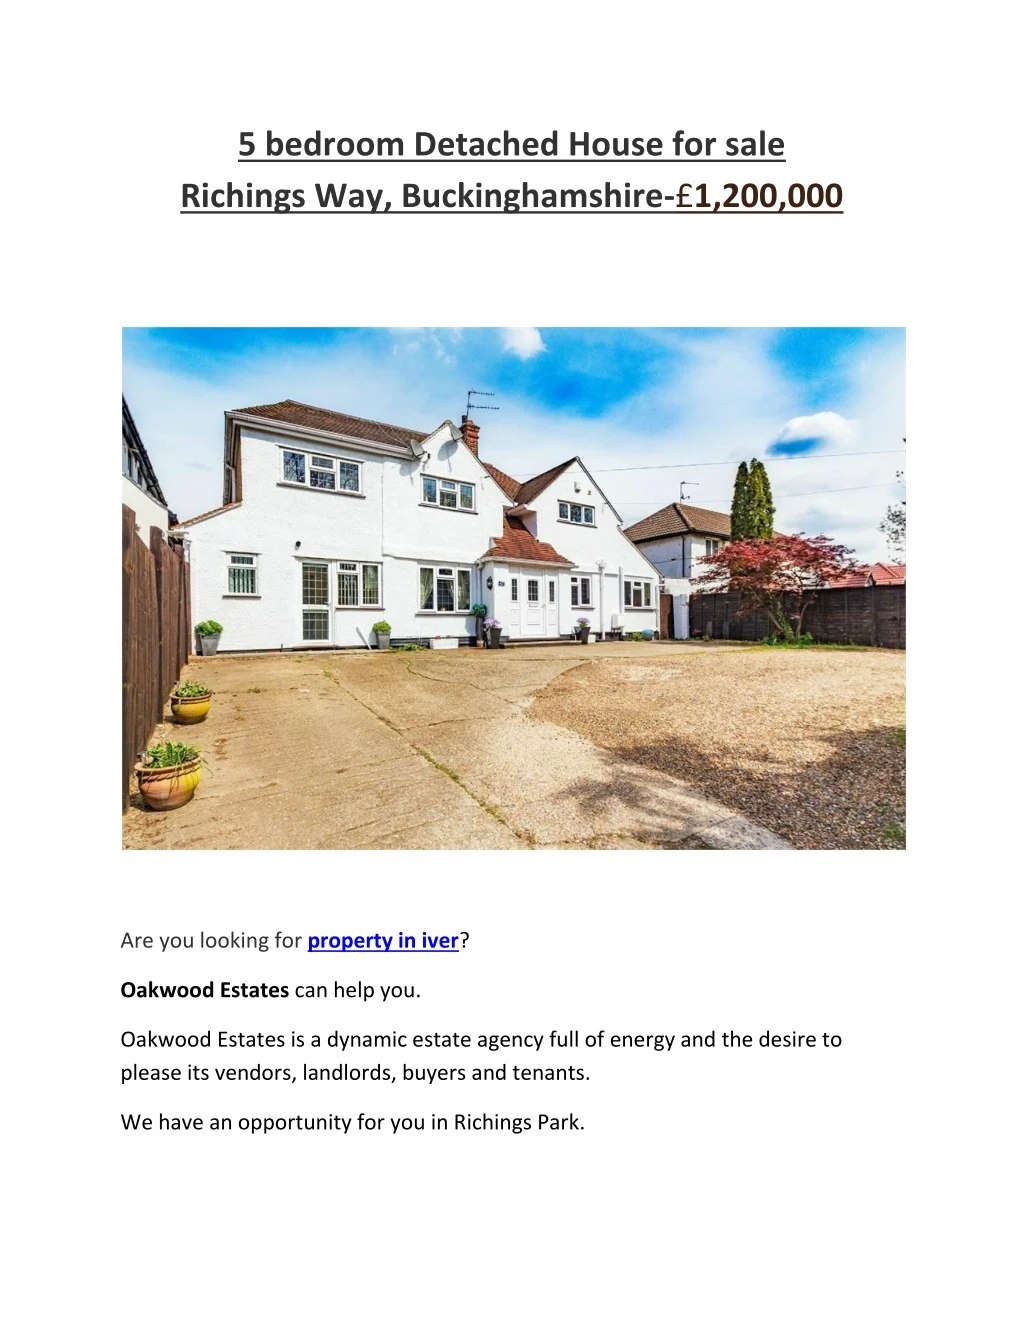 5 bedroom detached house for sale richings